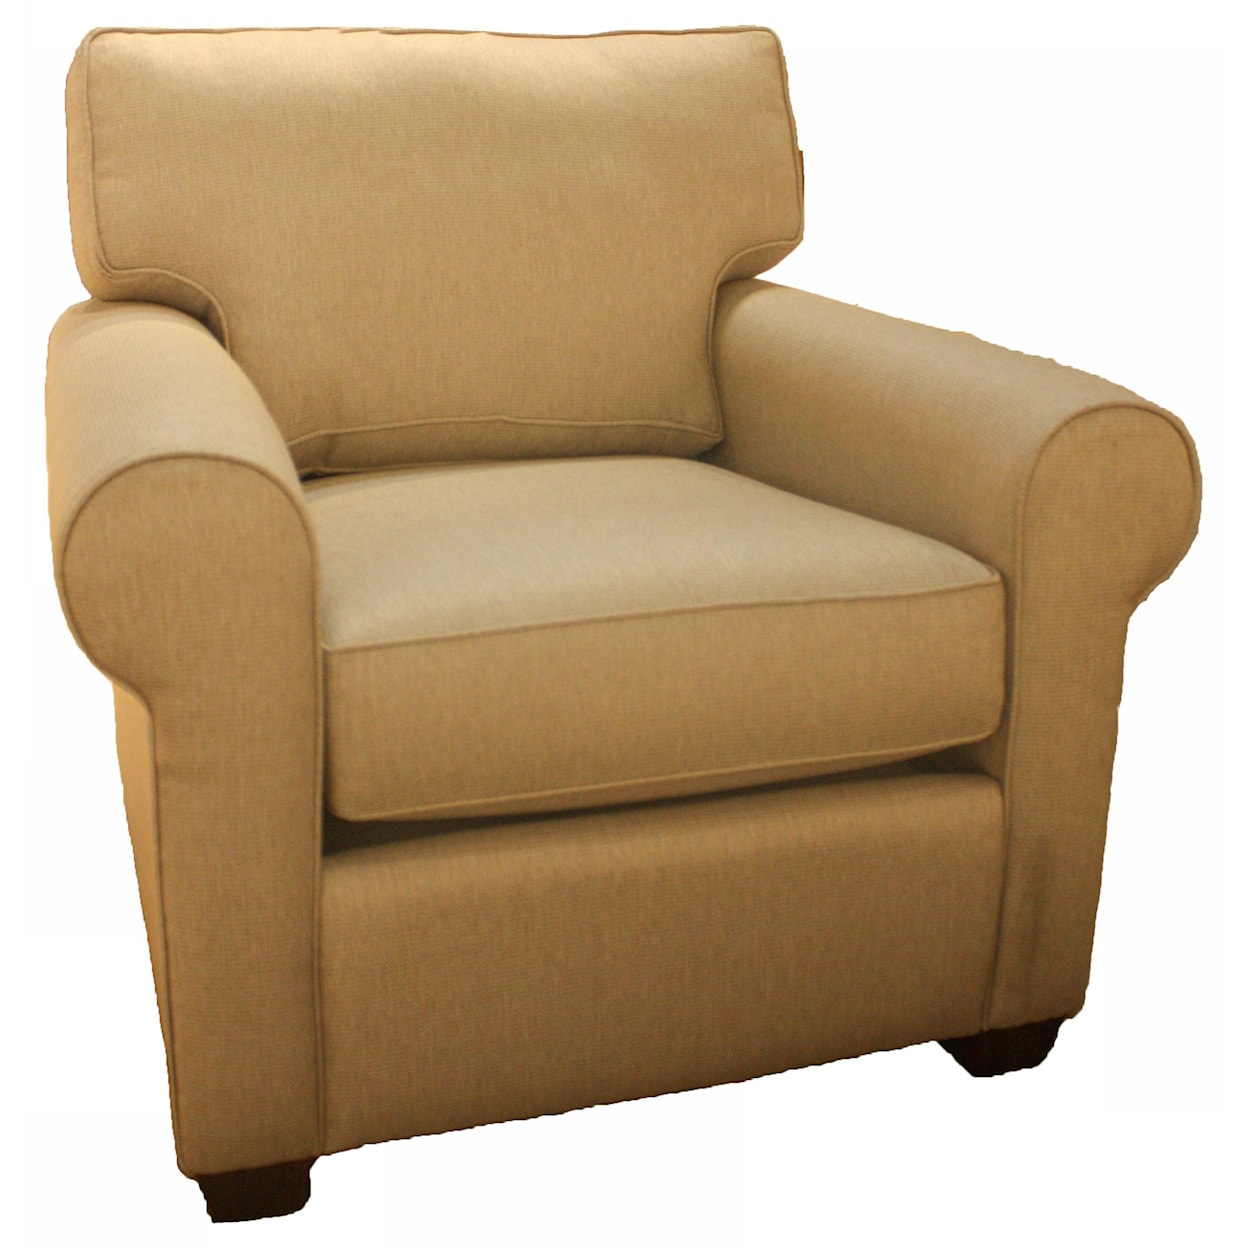 Capris Furniture 402 Upholstered Chair